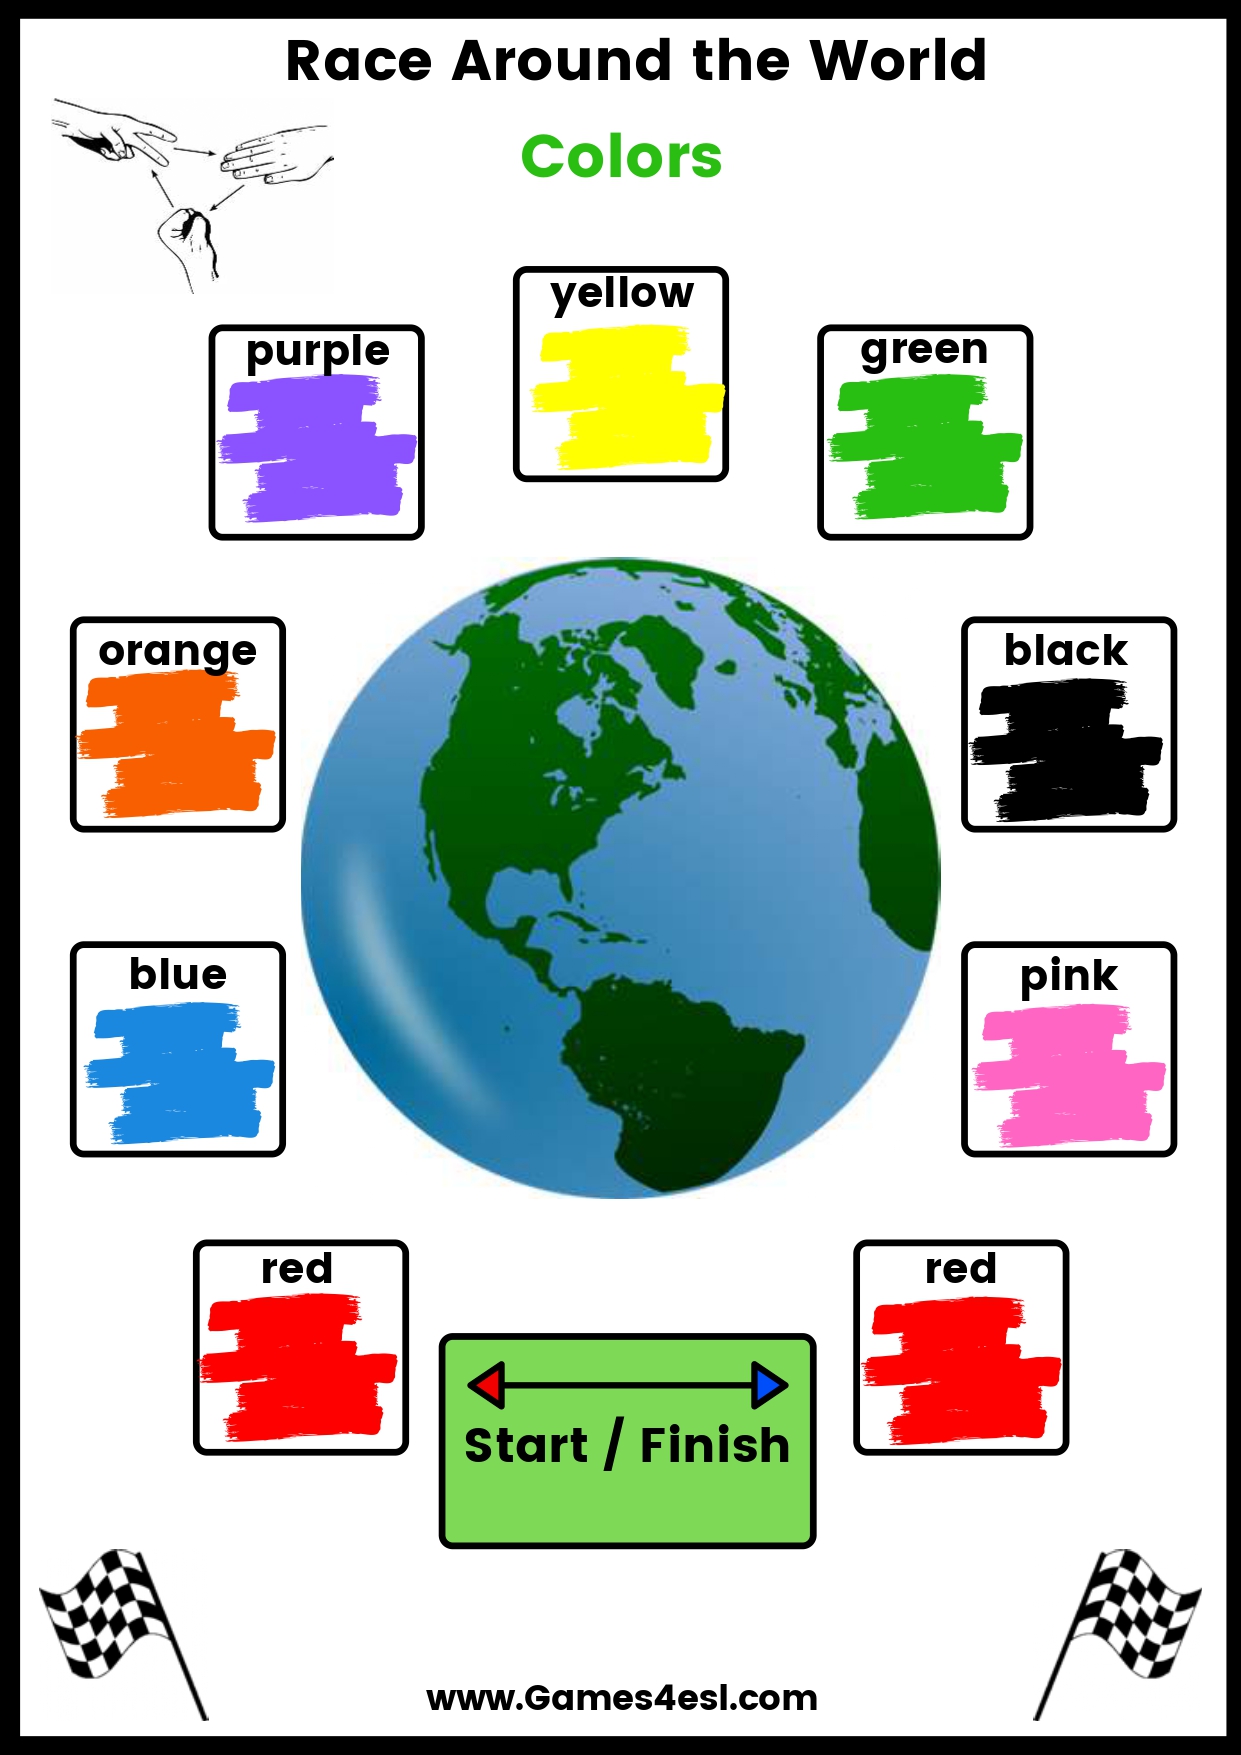 A printable board game to teach the names of colors in English.